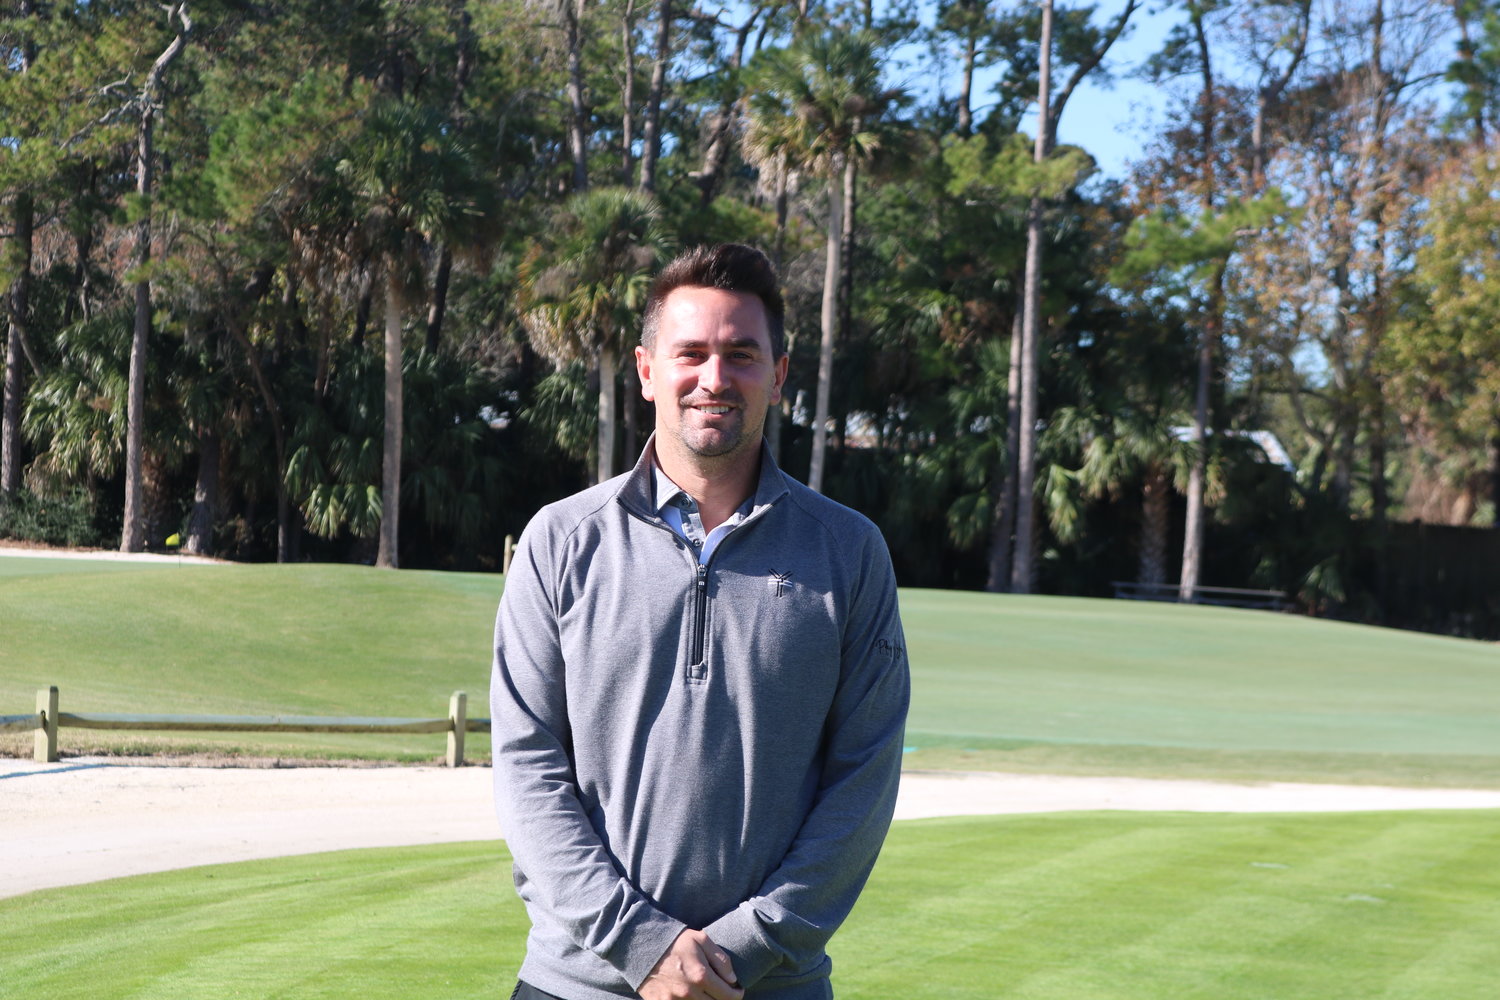 Zach Vinal is the Director of Golf at The Yards, which was established in 2020.